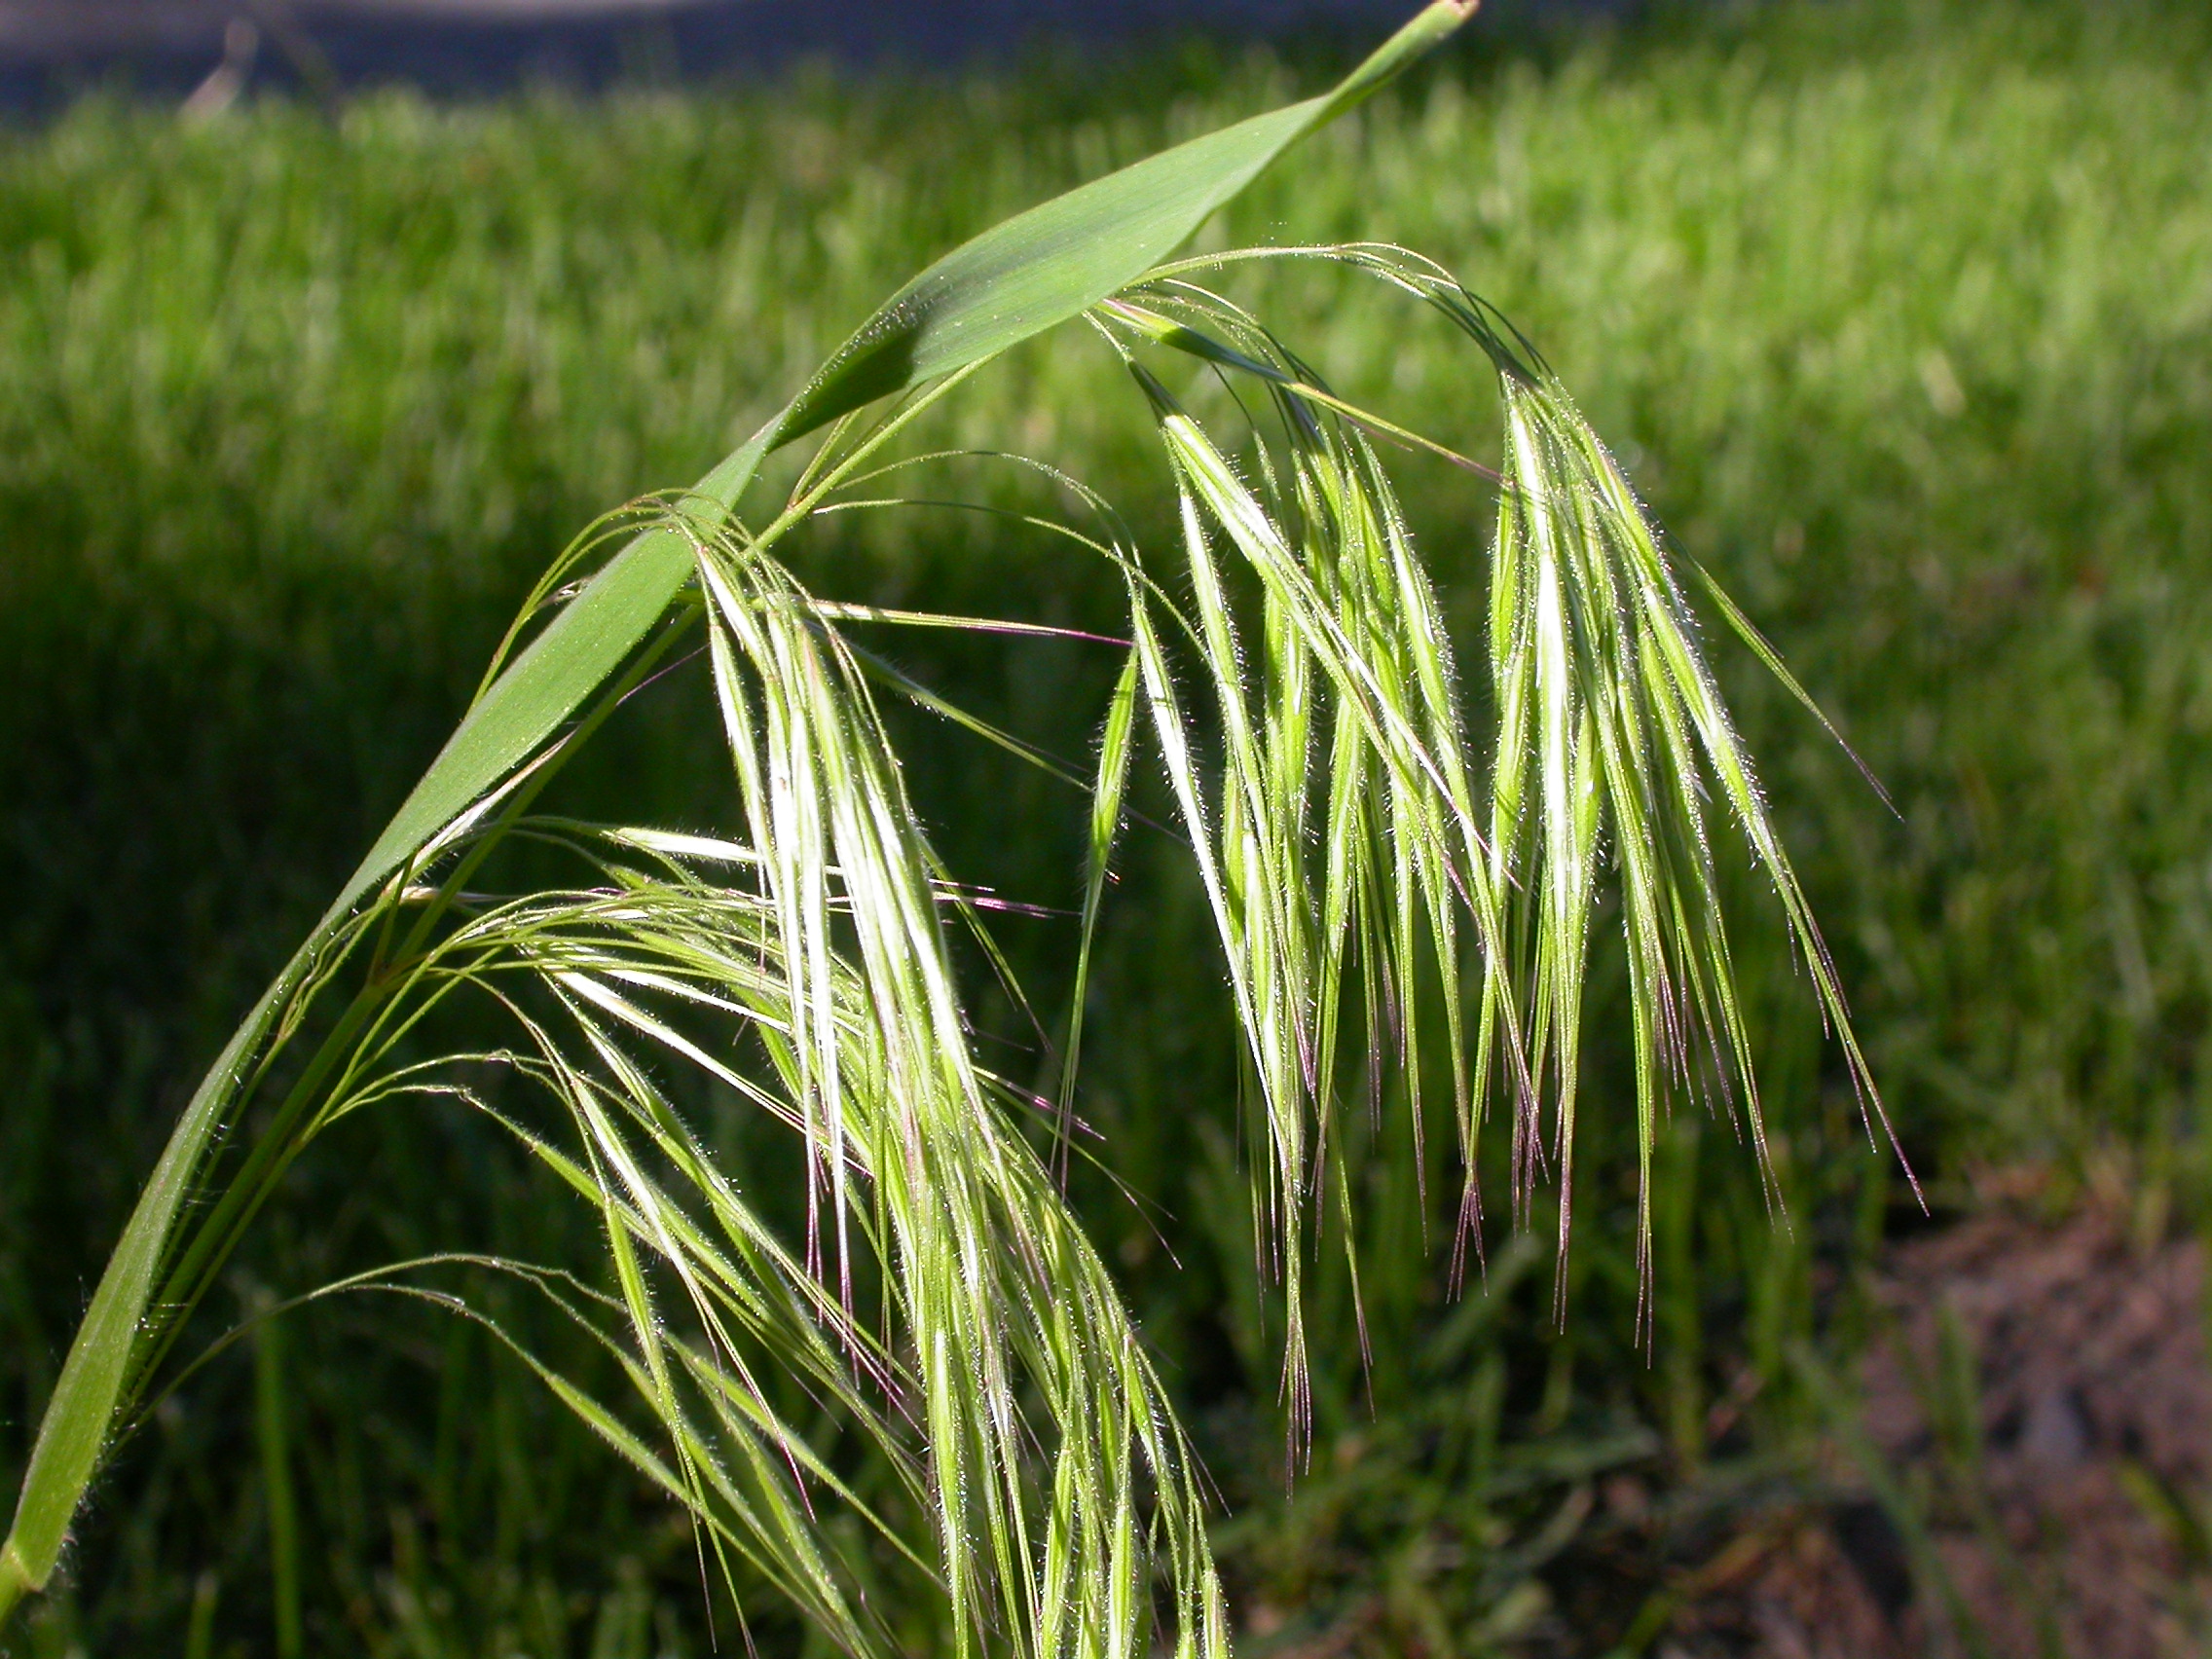 Cheatgrass, the Scourge of the Great Basin Desert, was introduced from Eurasia in the late 19th Century by ranchers and travelers.